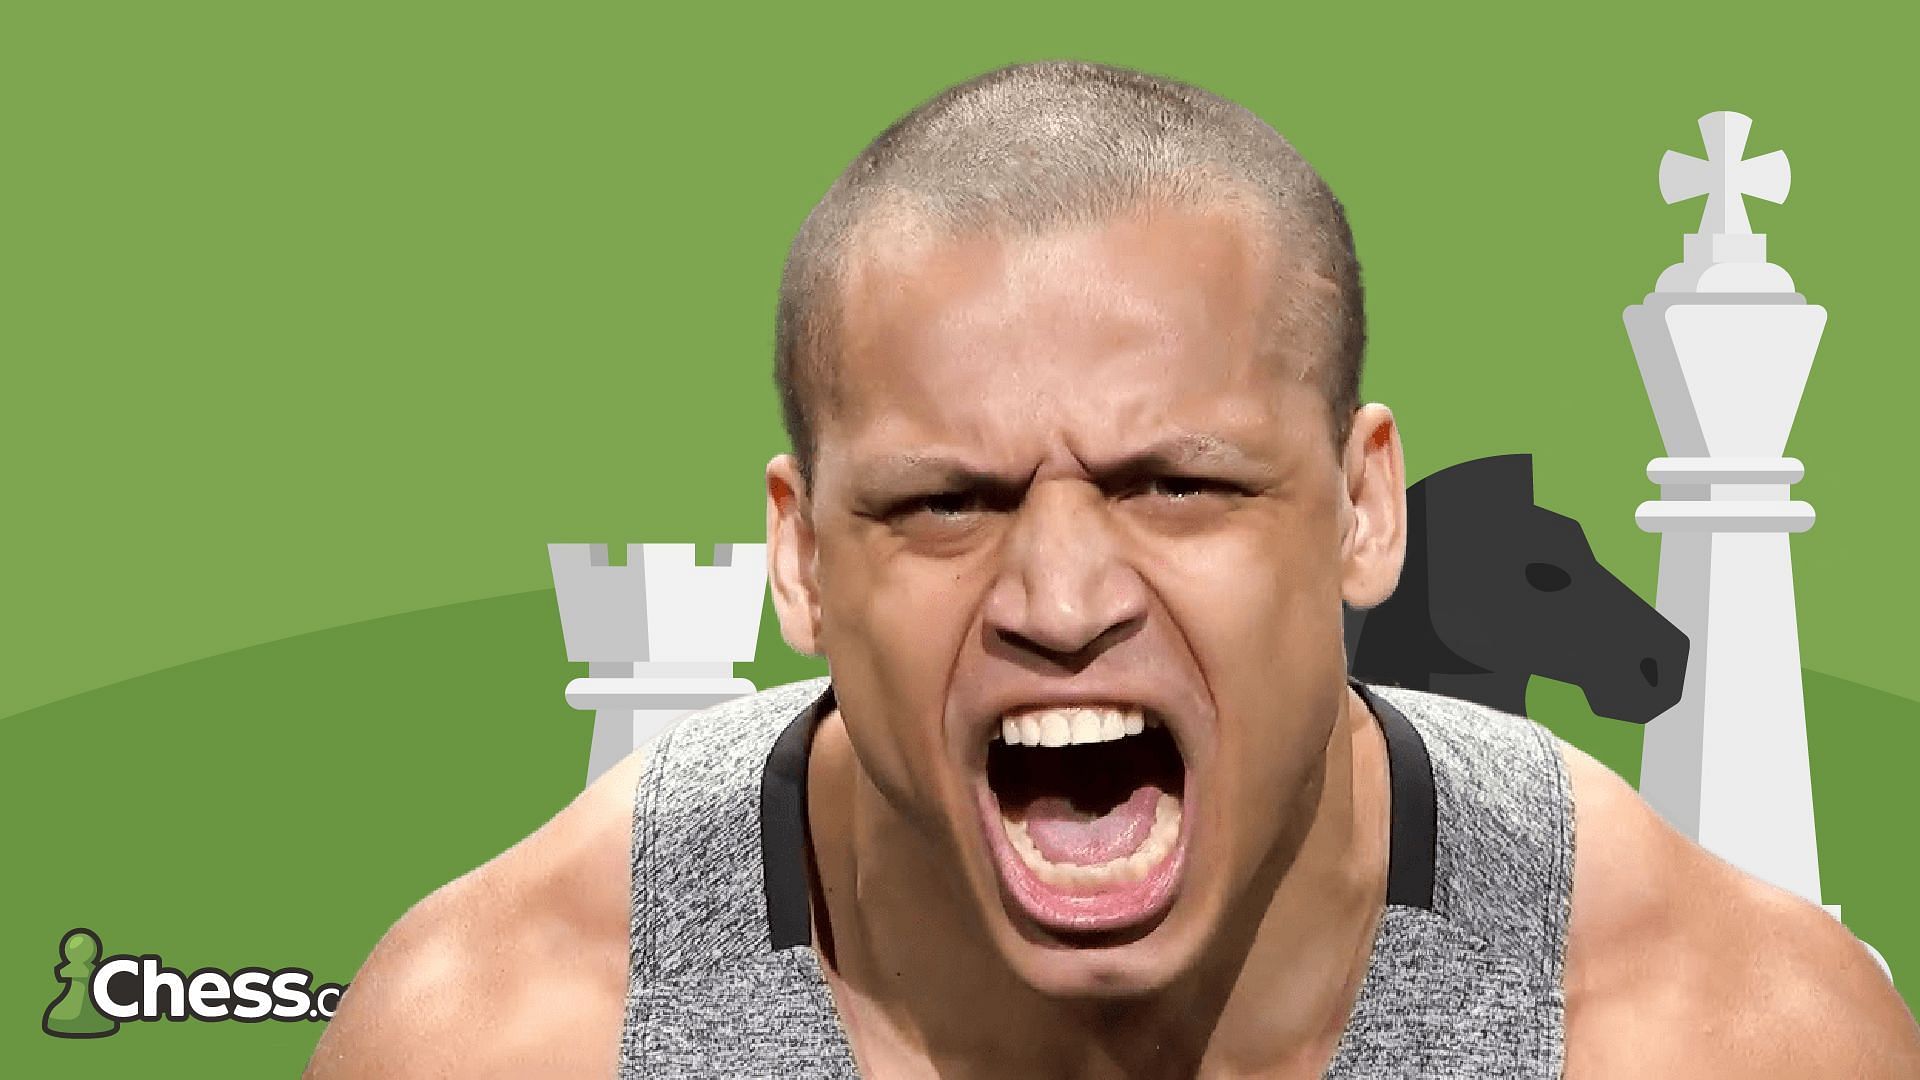 Tyler1 keeps on improving at chess (Image via Chess.com)